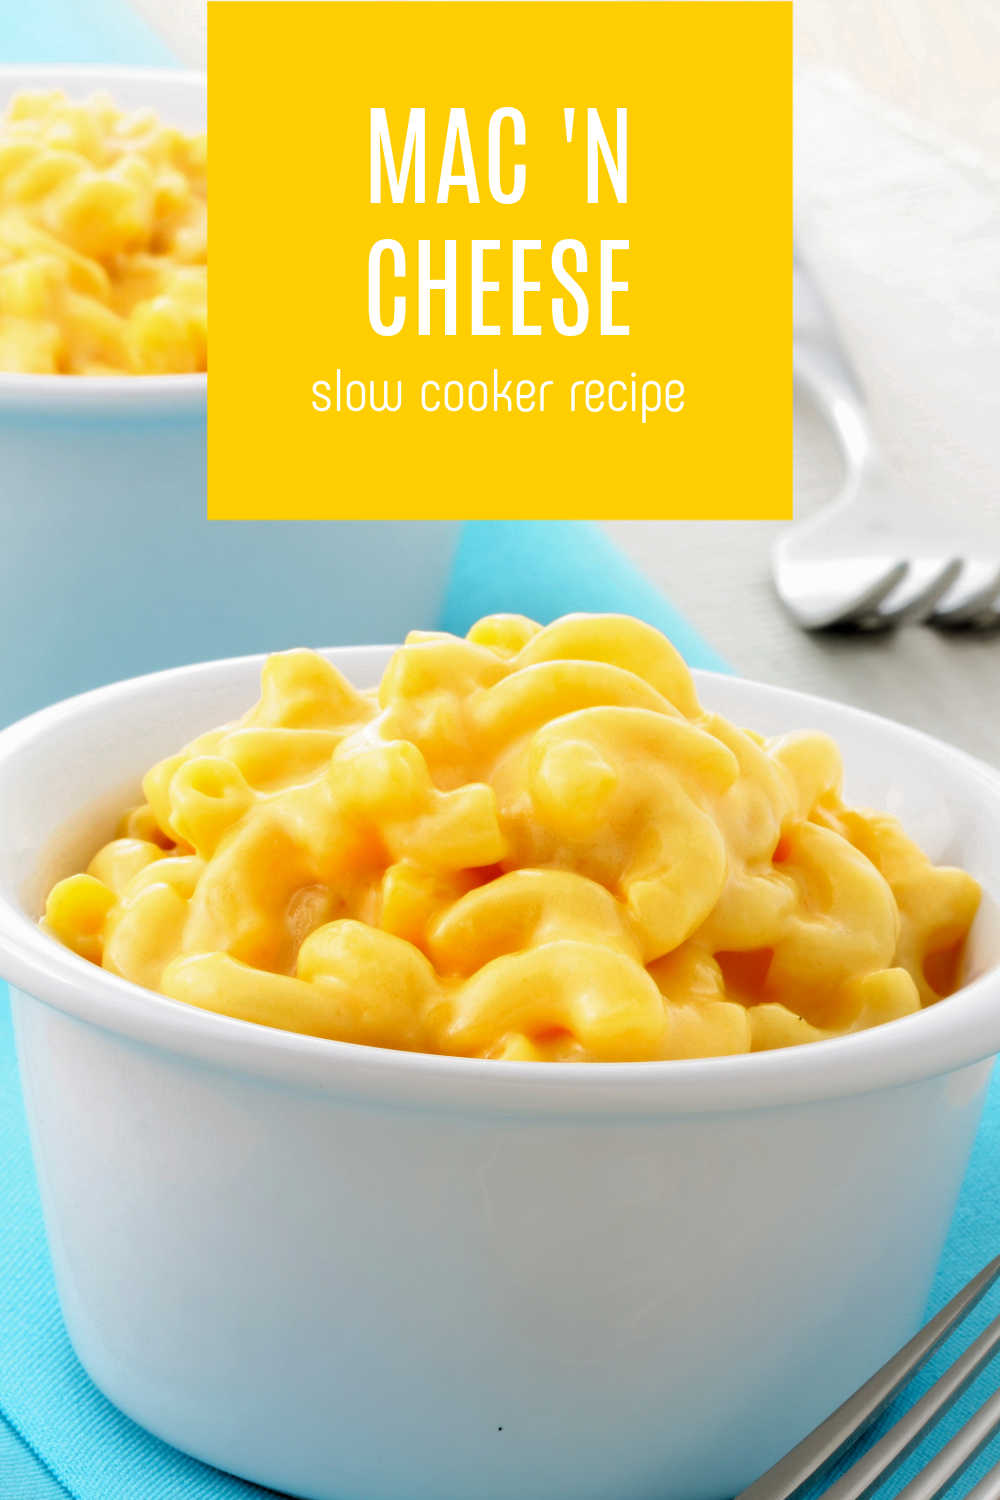 Creamy and Easy Slow Cooker Macaroni and Cheese